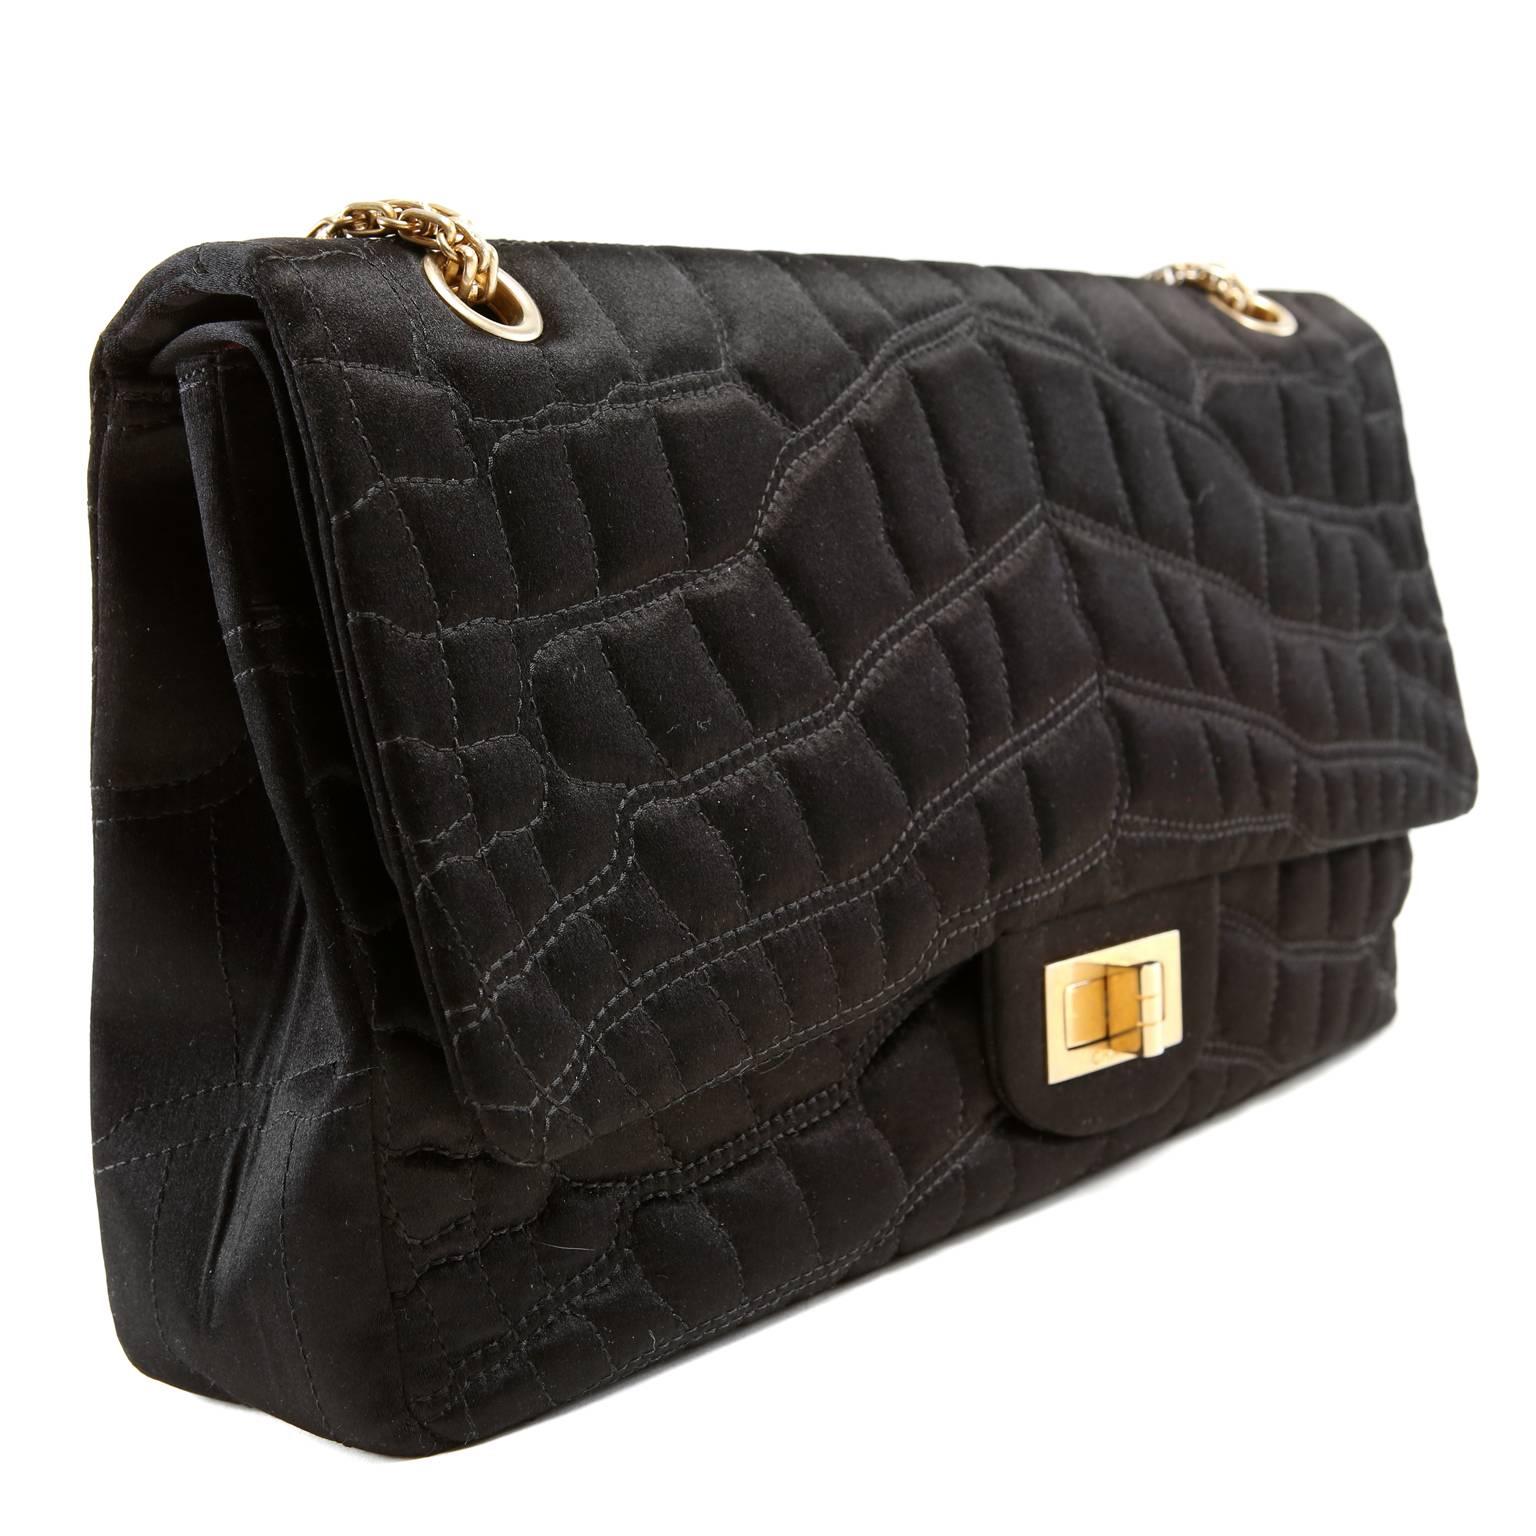  Chanel Black Satin Crocodile Print 2.55 Flap Bag is in pristine condition.  Unique texture and fabrication makes this piece irresistible for collectors. 
 
Black satin is quilted in crocodile skin pattern.  Matte gold mademoiselle twist lock